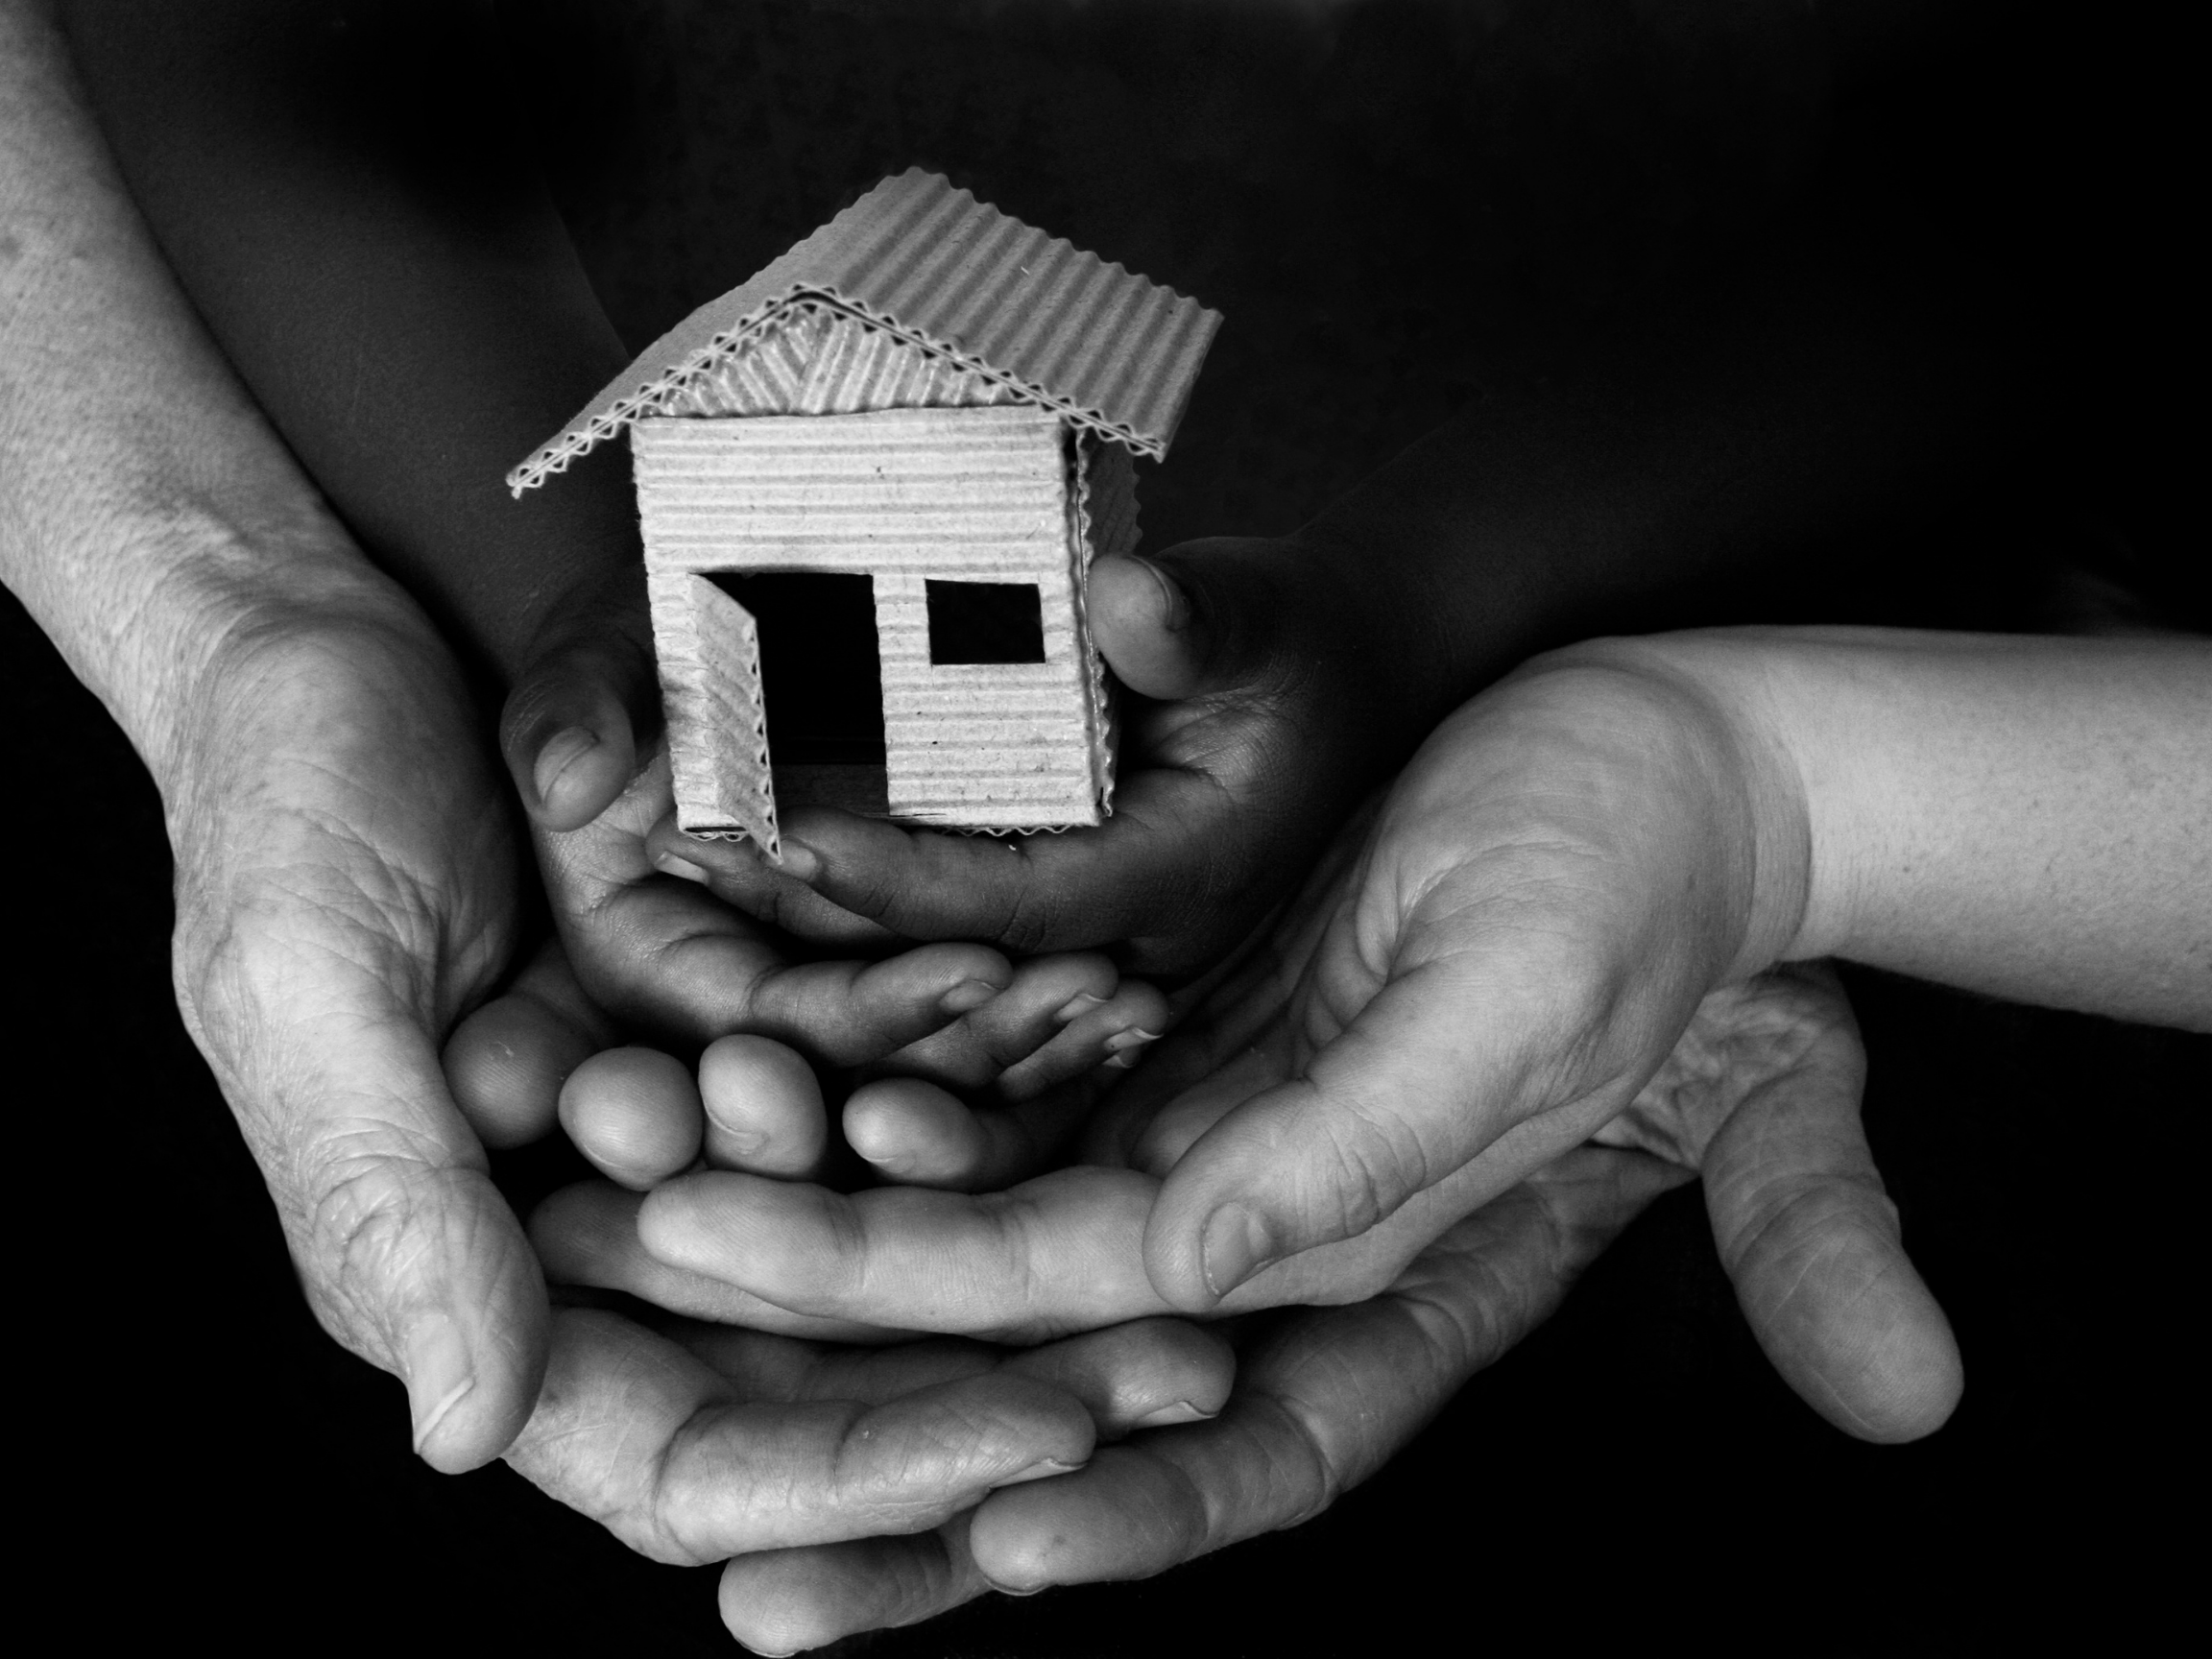 General image of multiple hands holding a small home.